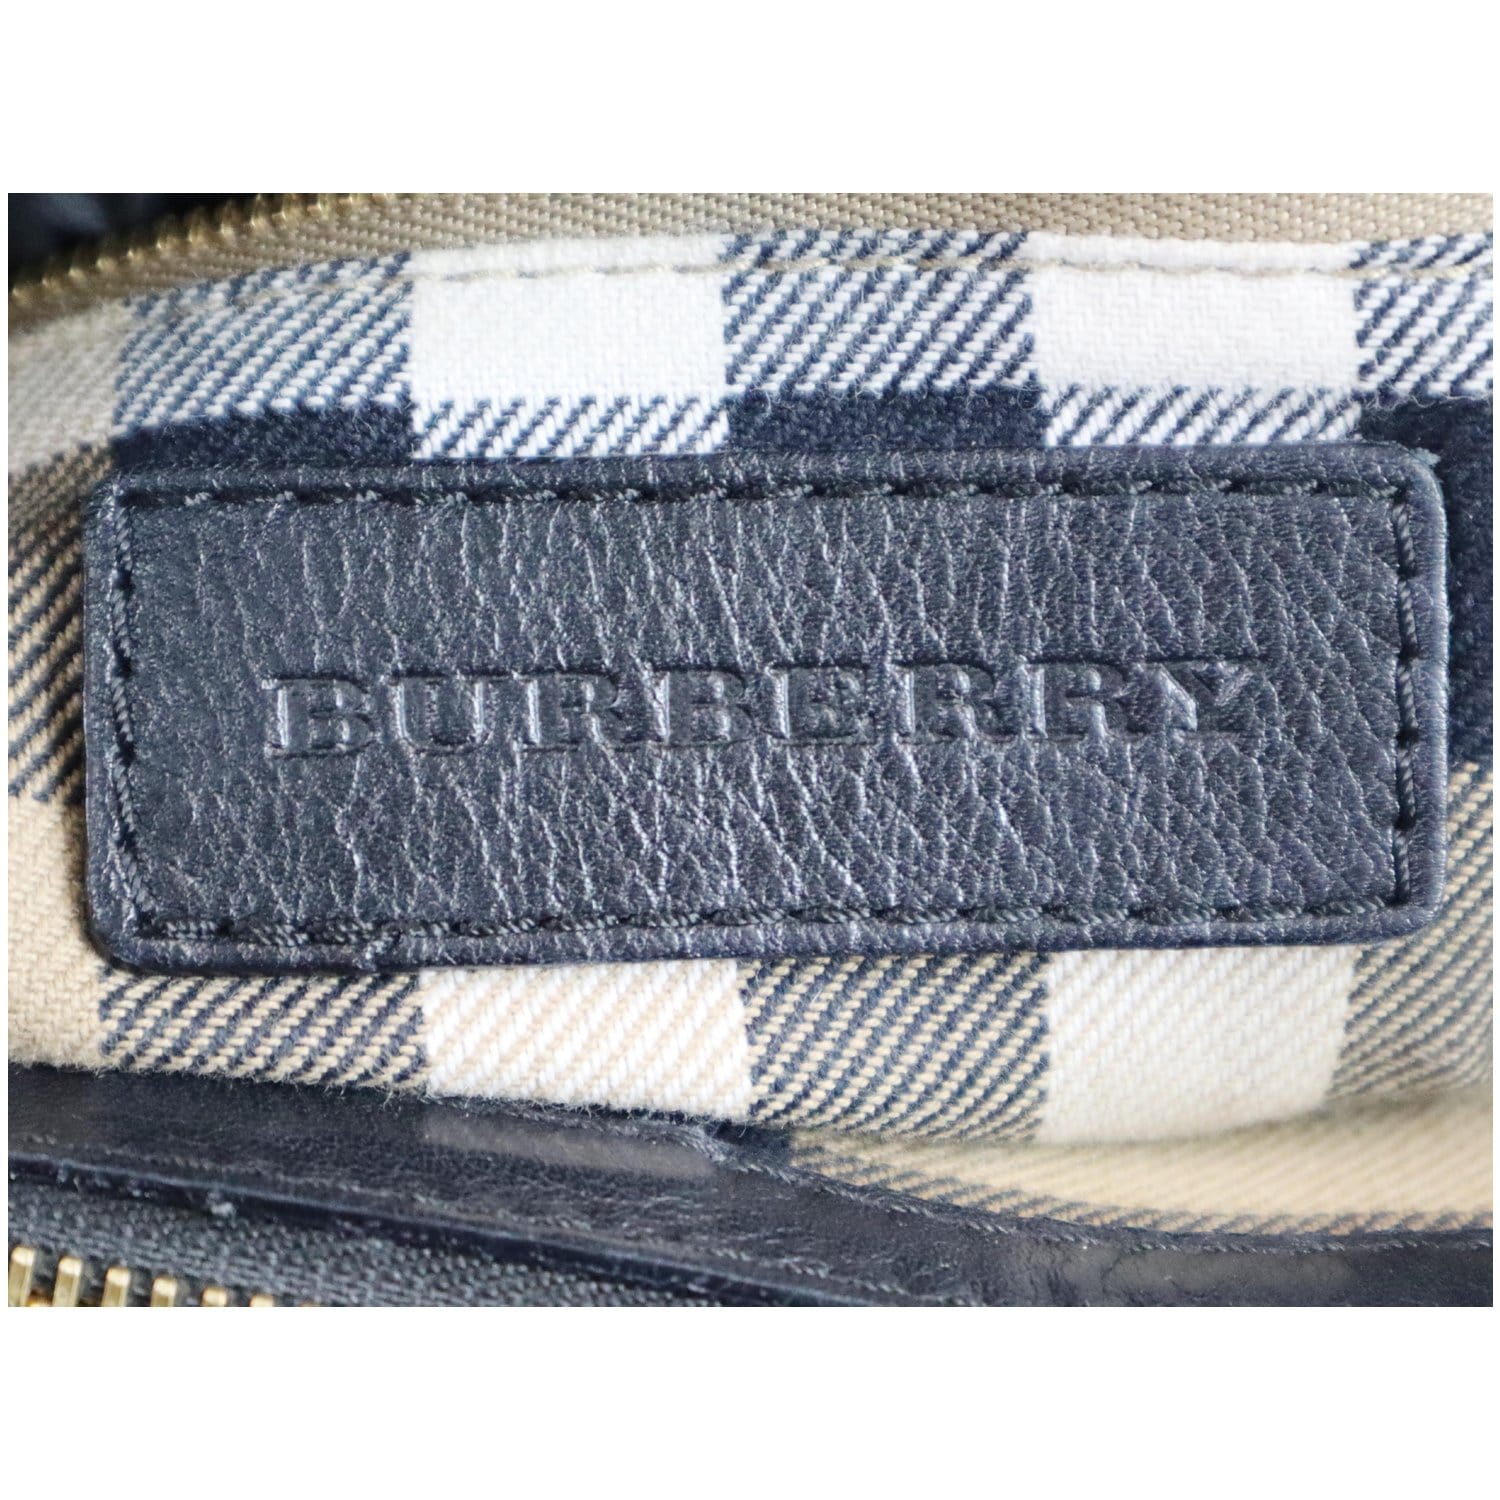 Burberry Bags & Women's Faux Leather Exterior, Authenticity Guaranteed